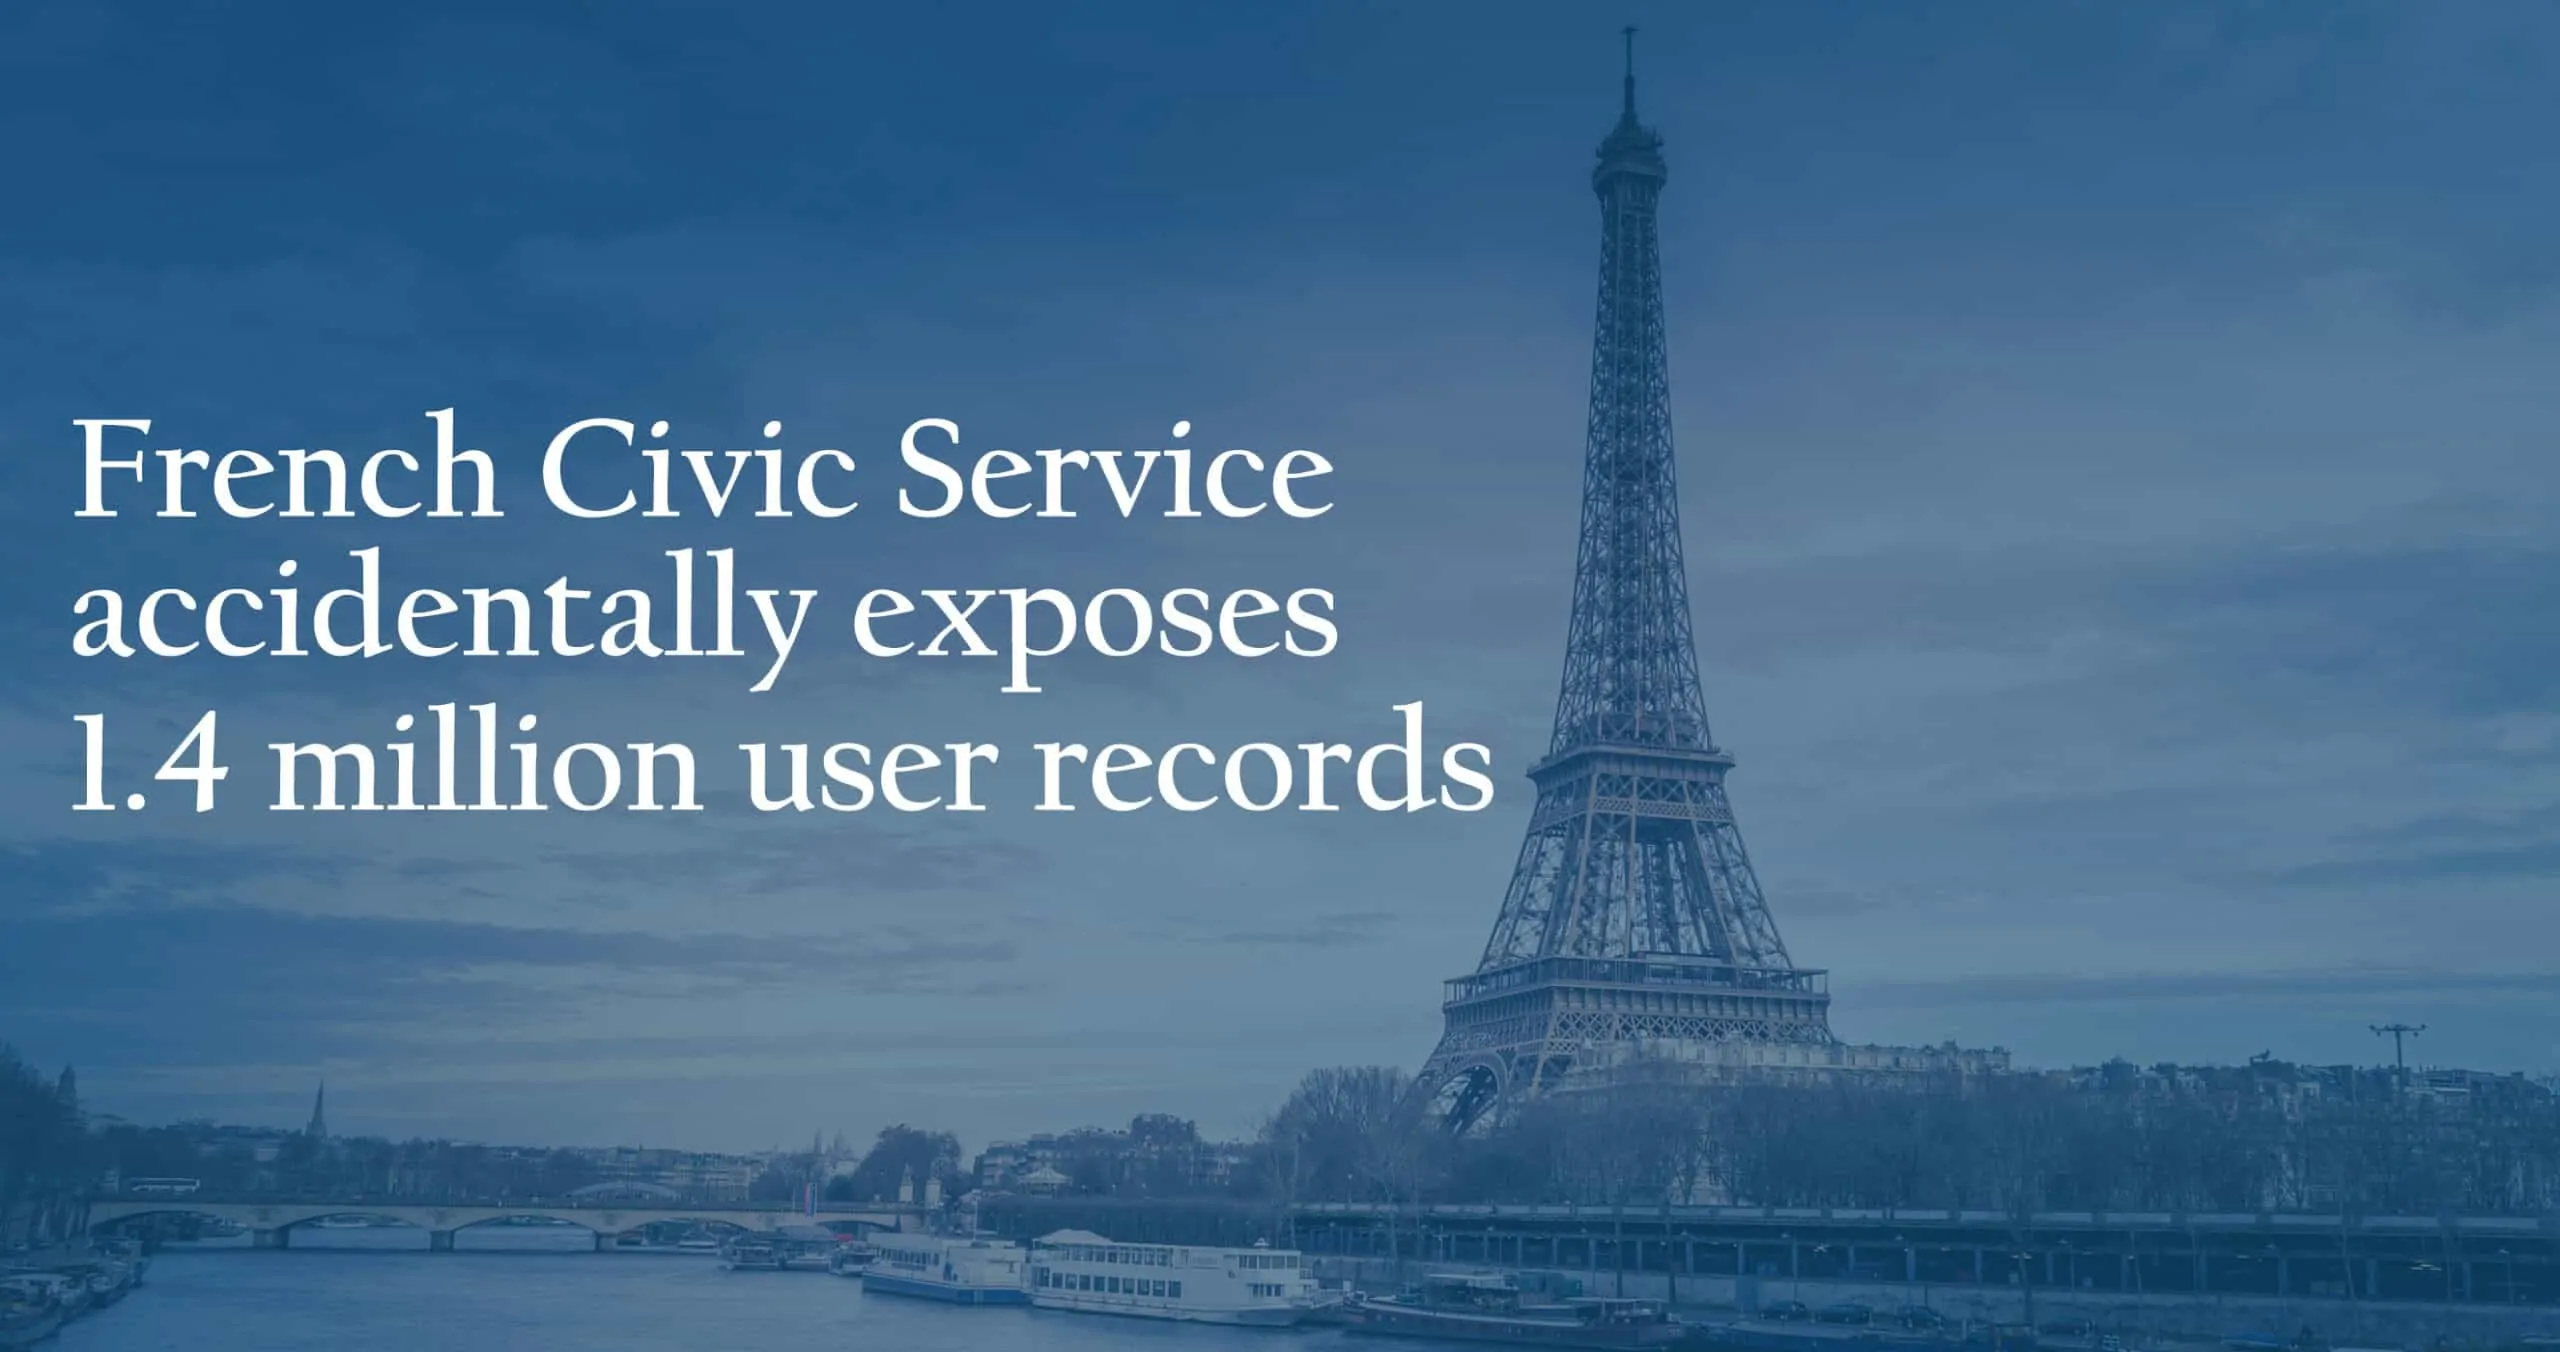 French Civic Service exposes user records